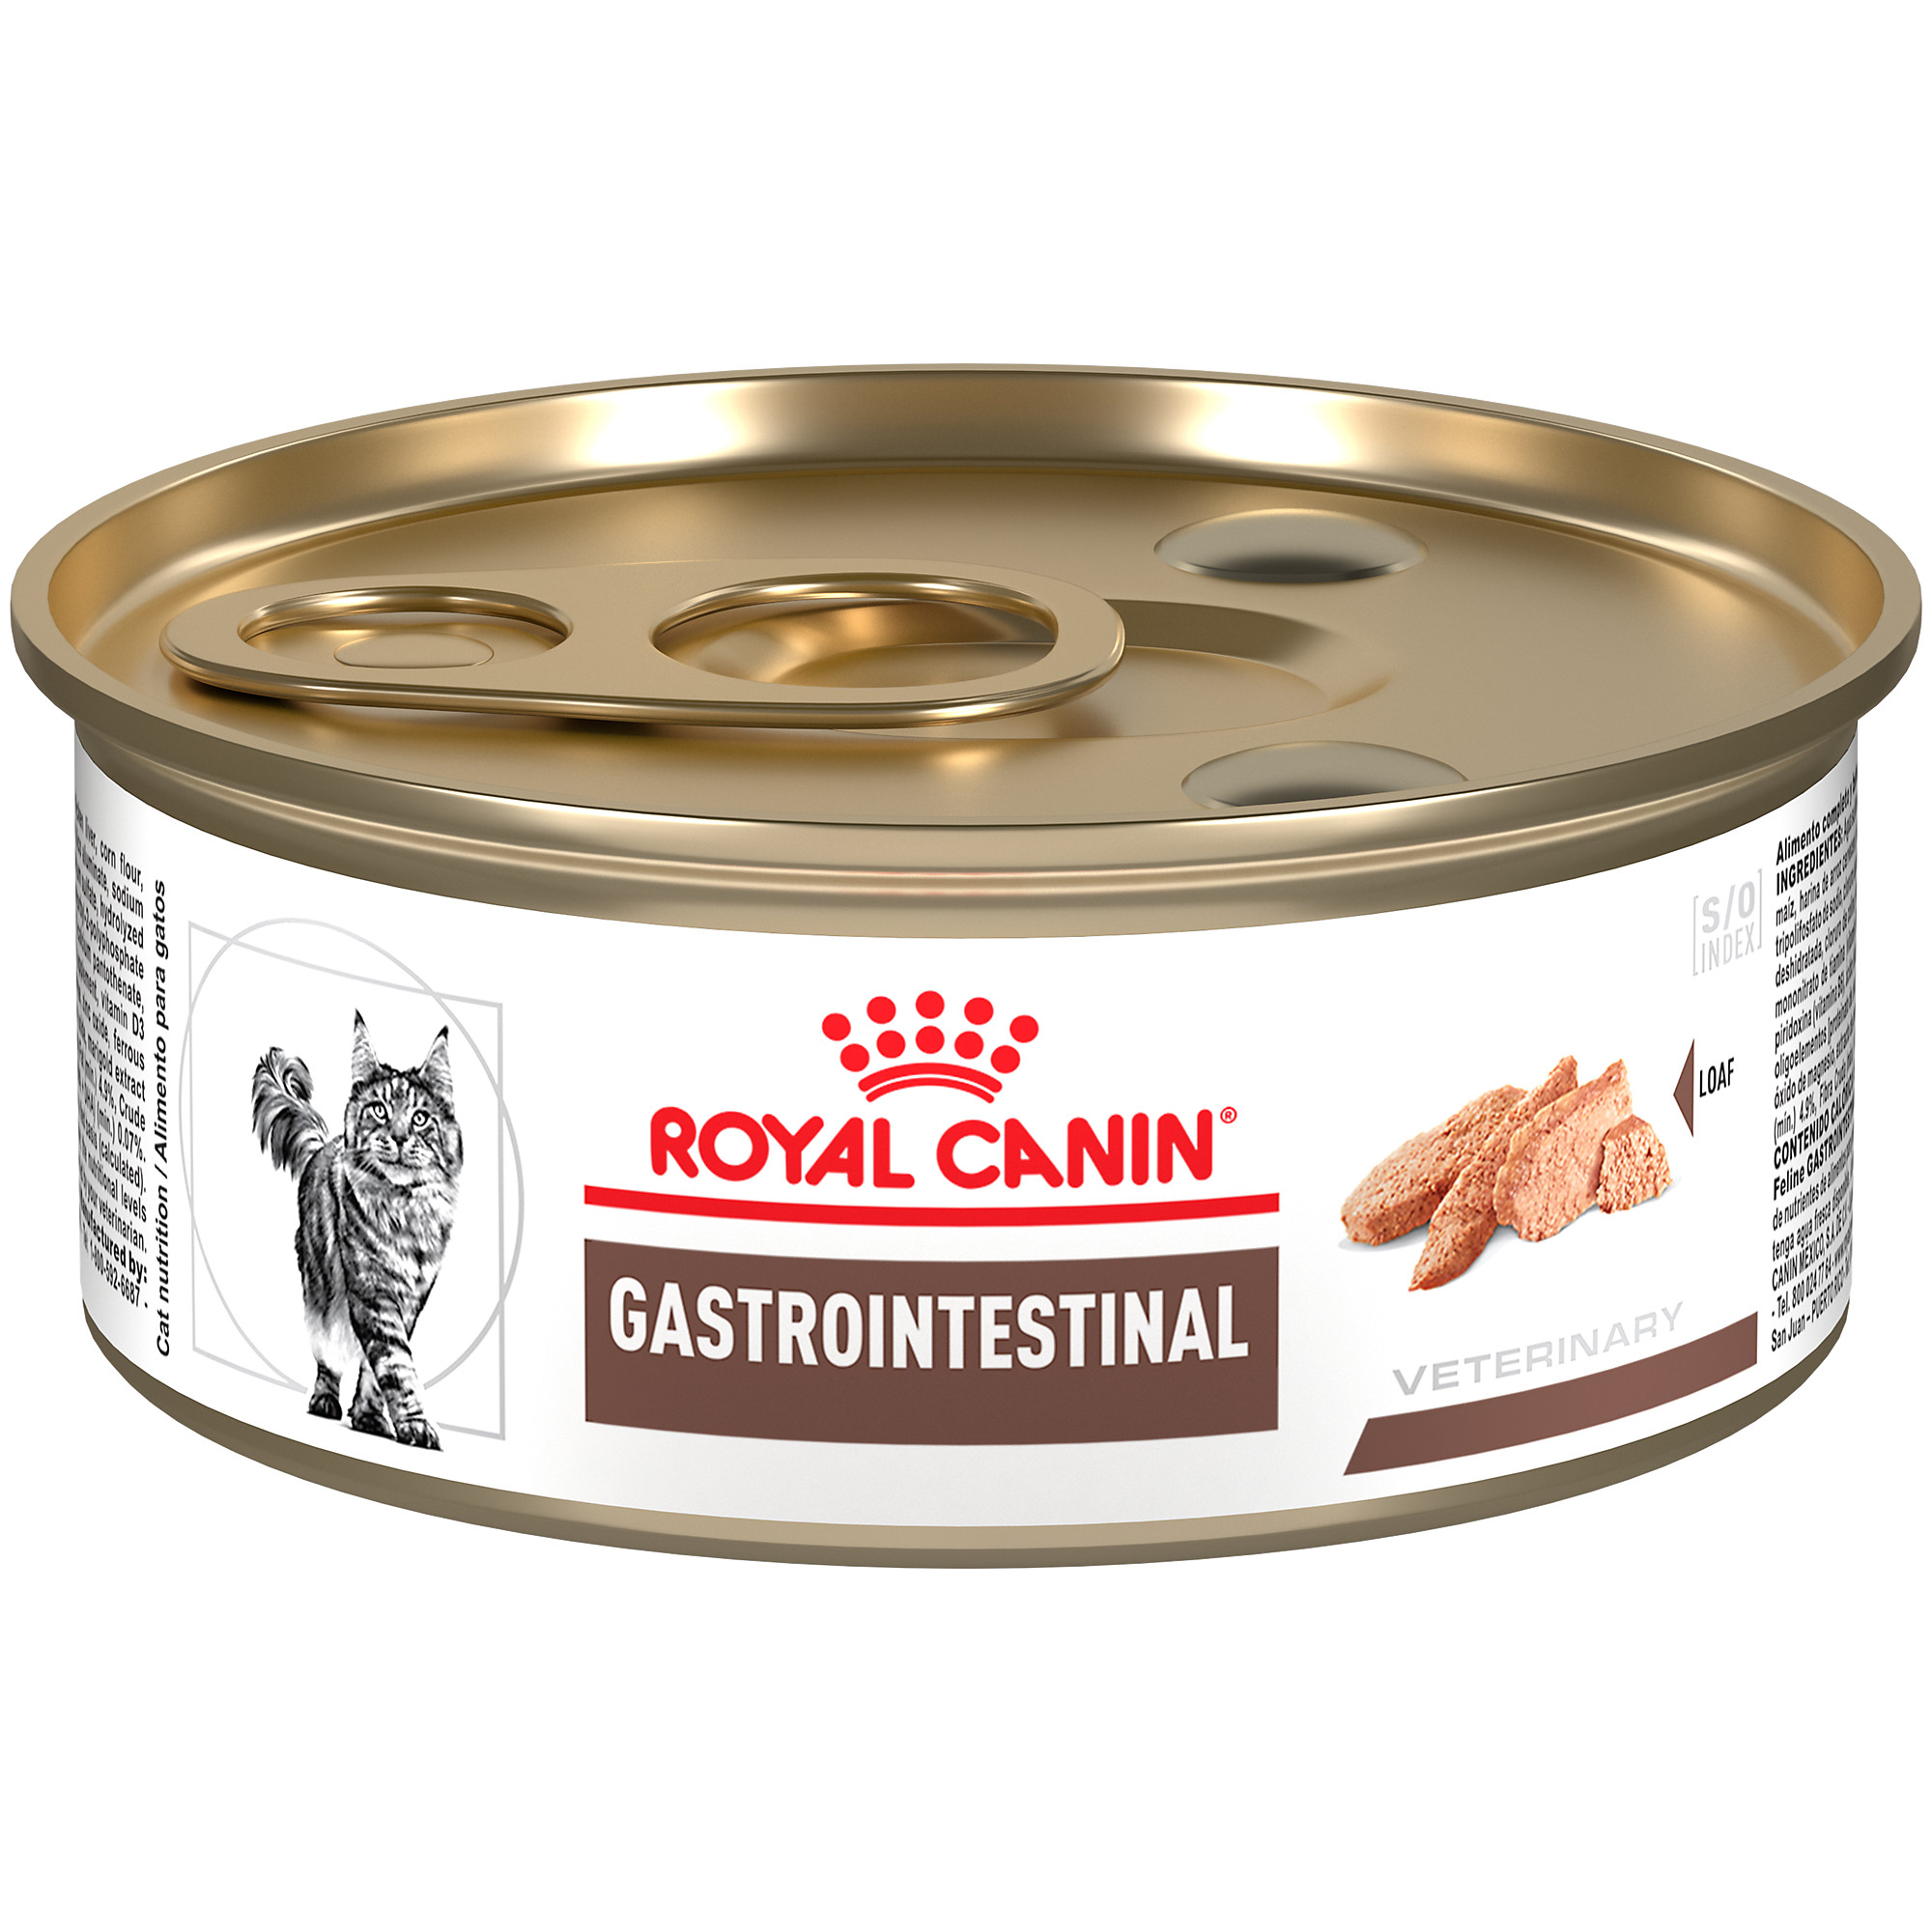 Gastrointestinal Loaf Canned Cat Food Formerly